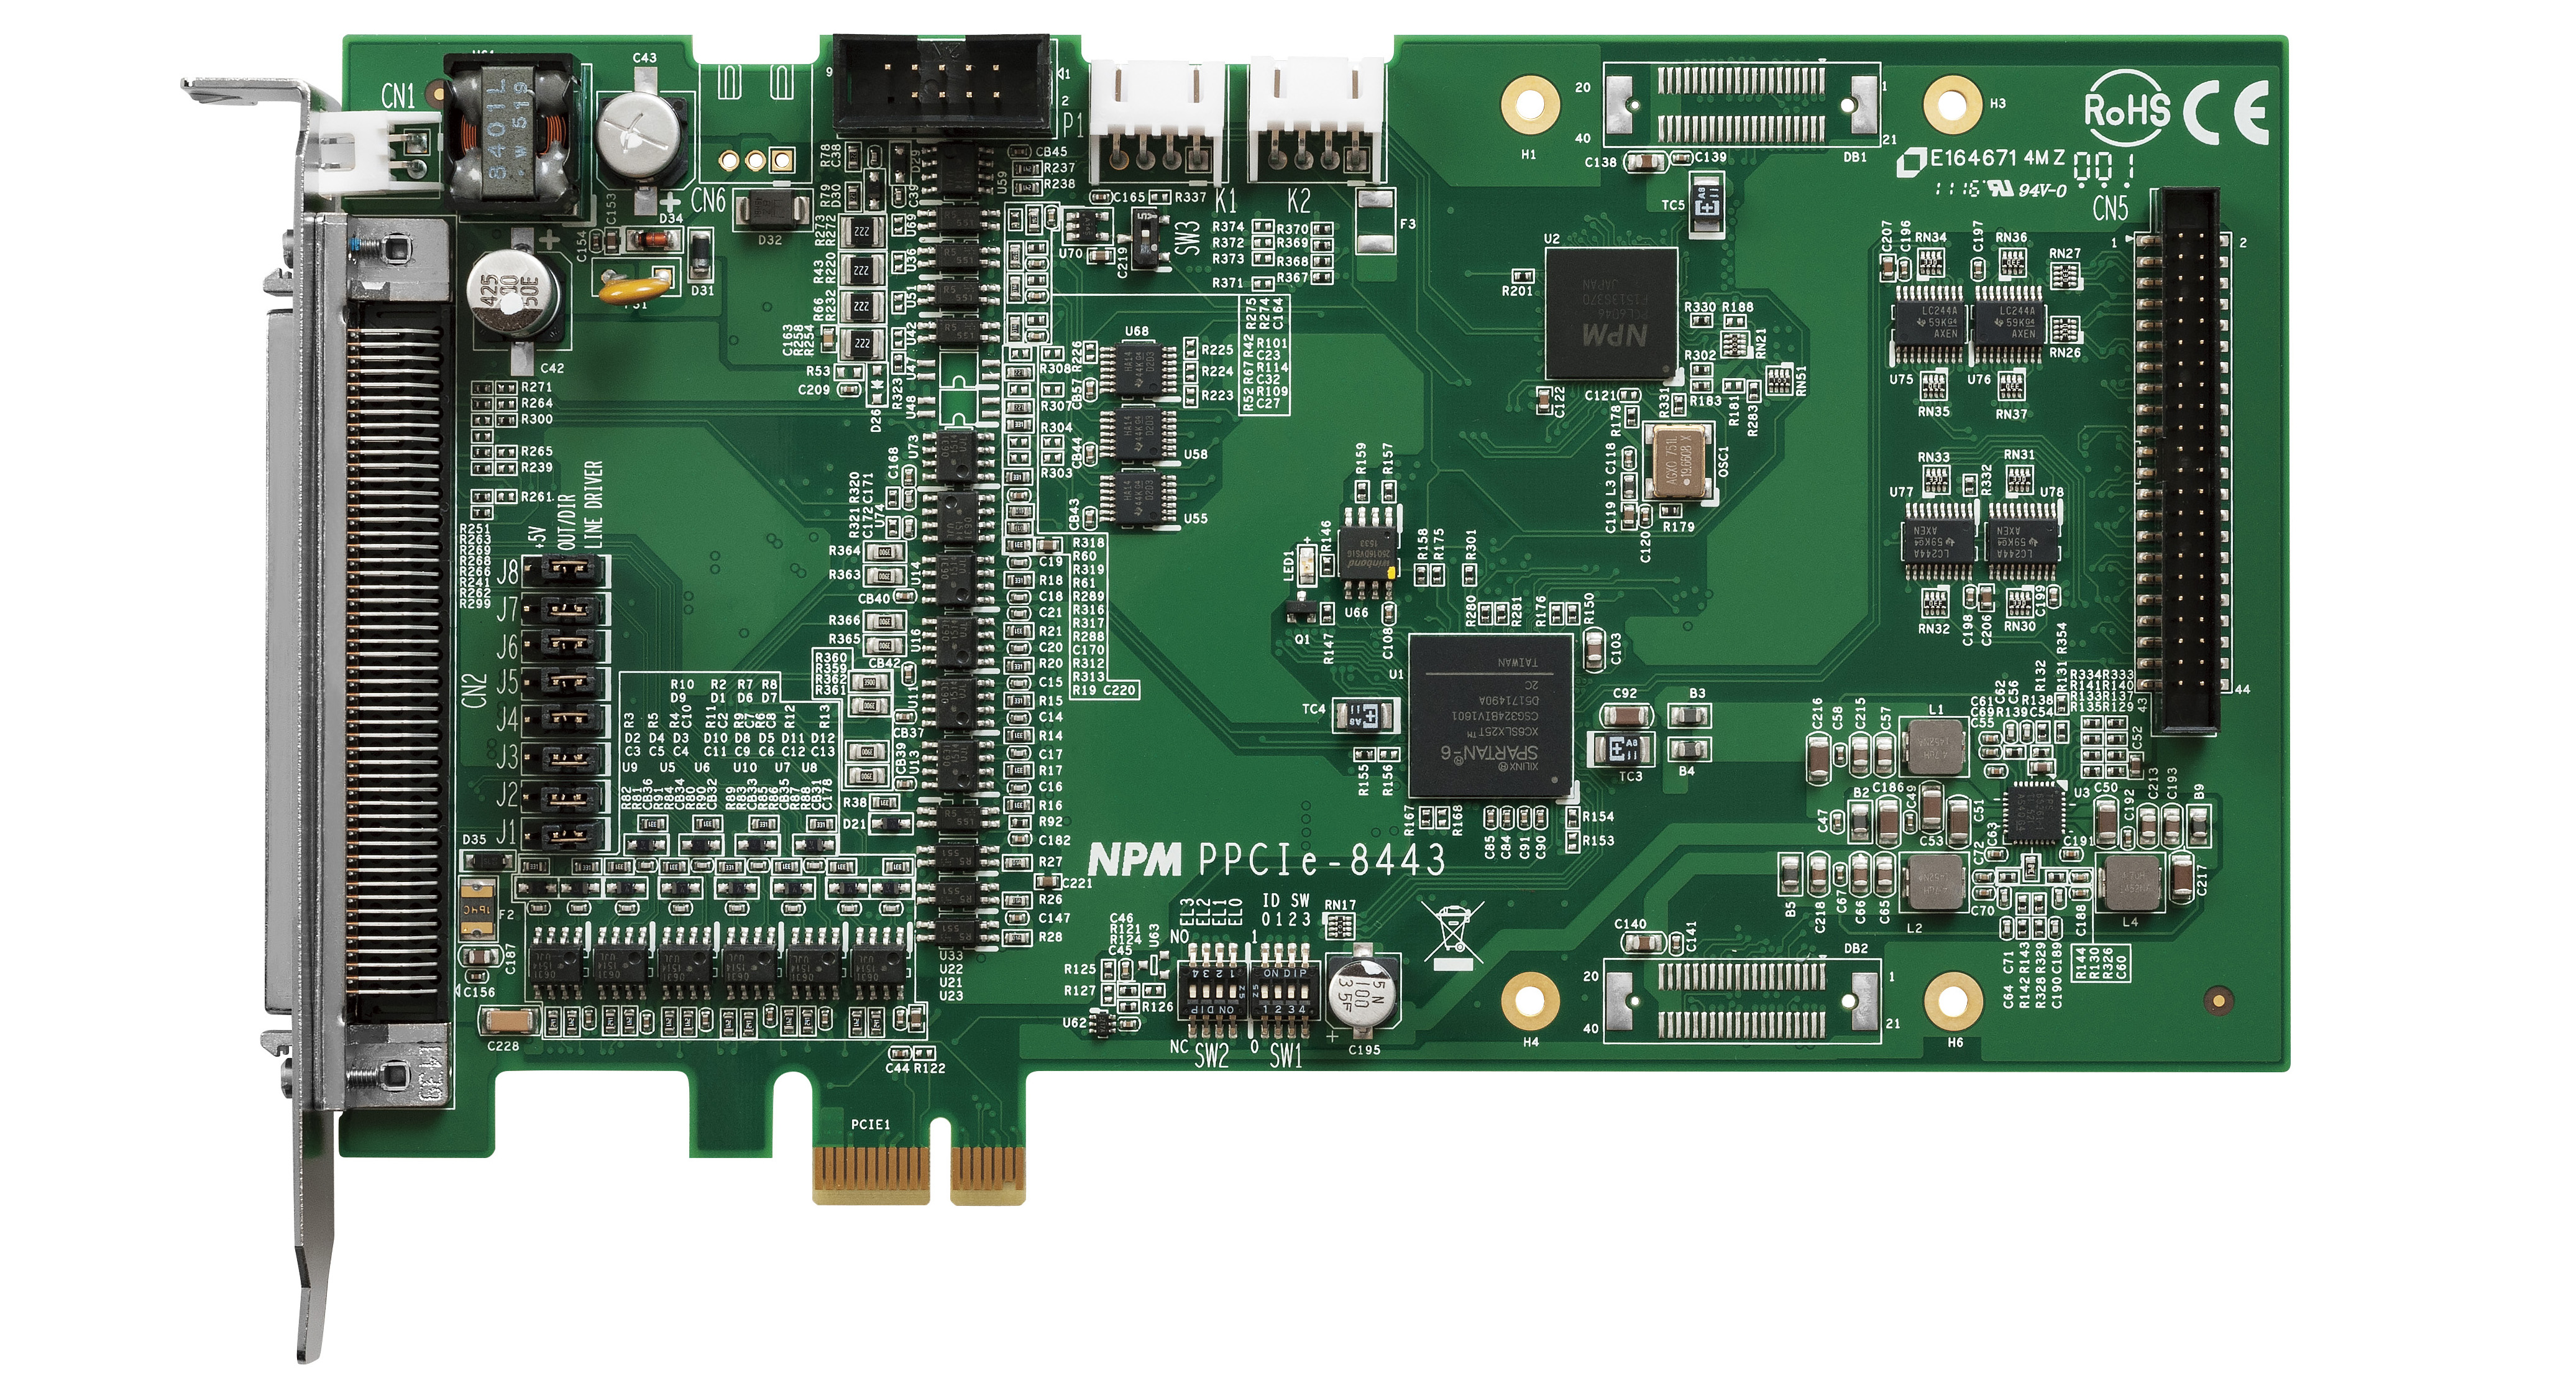 Nippon Pulse PPCIe8443 controller board with PCI-Express bus interface